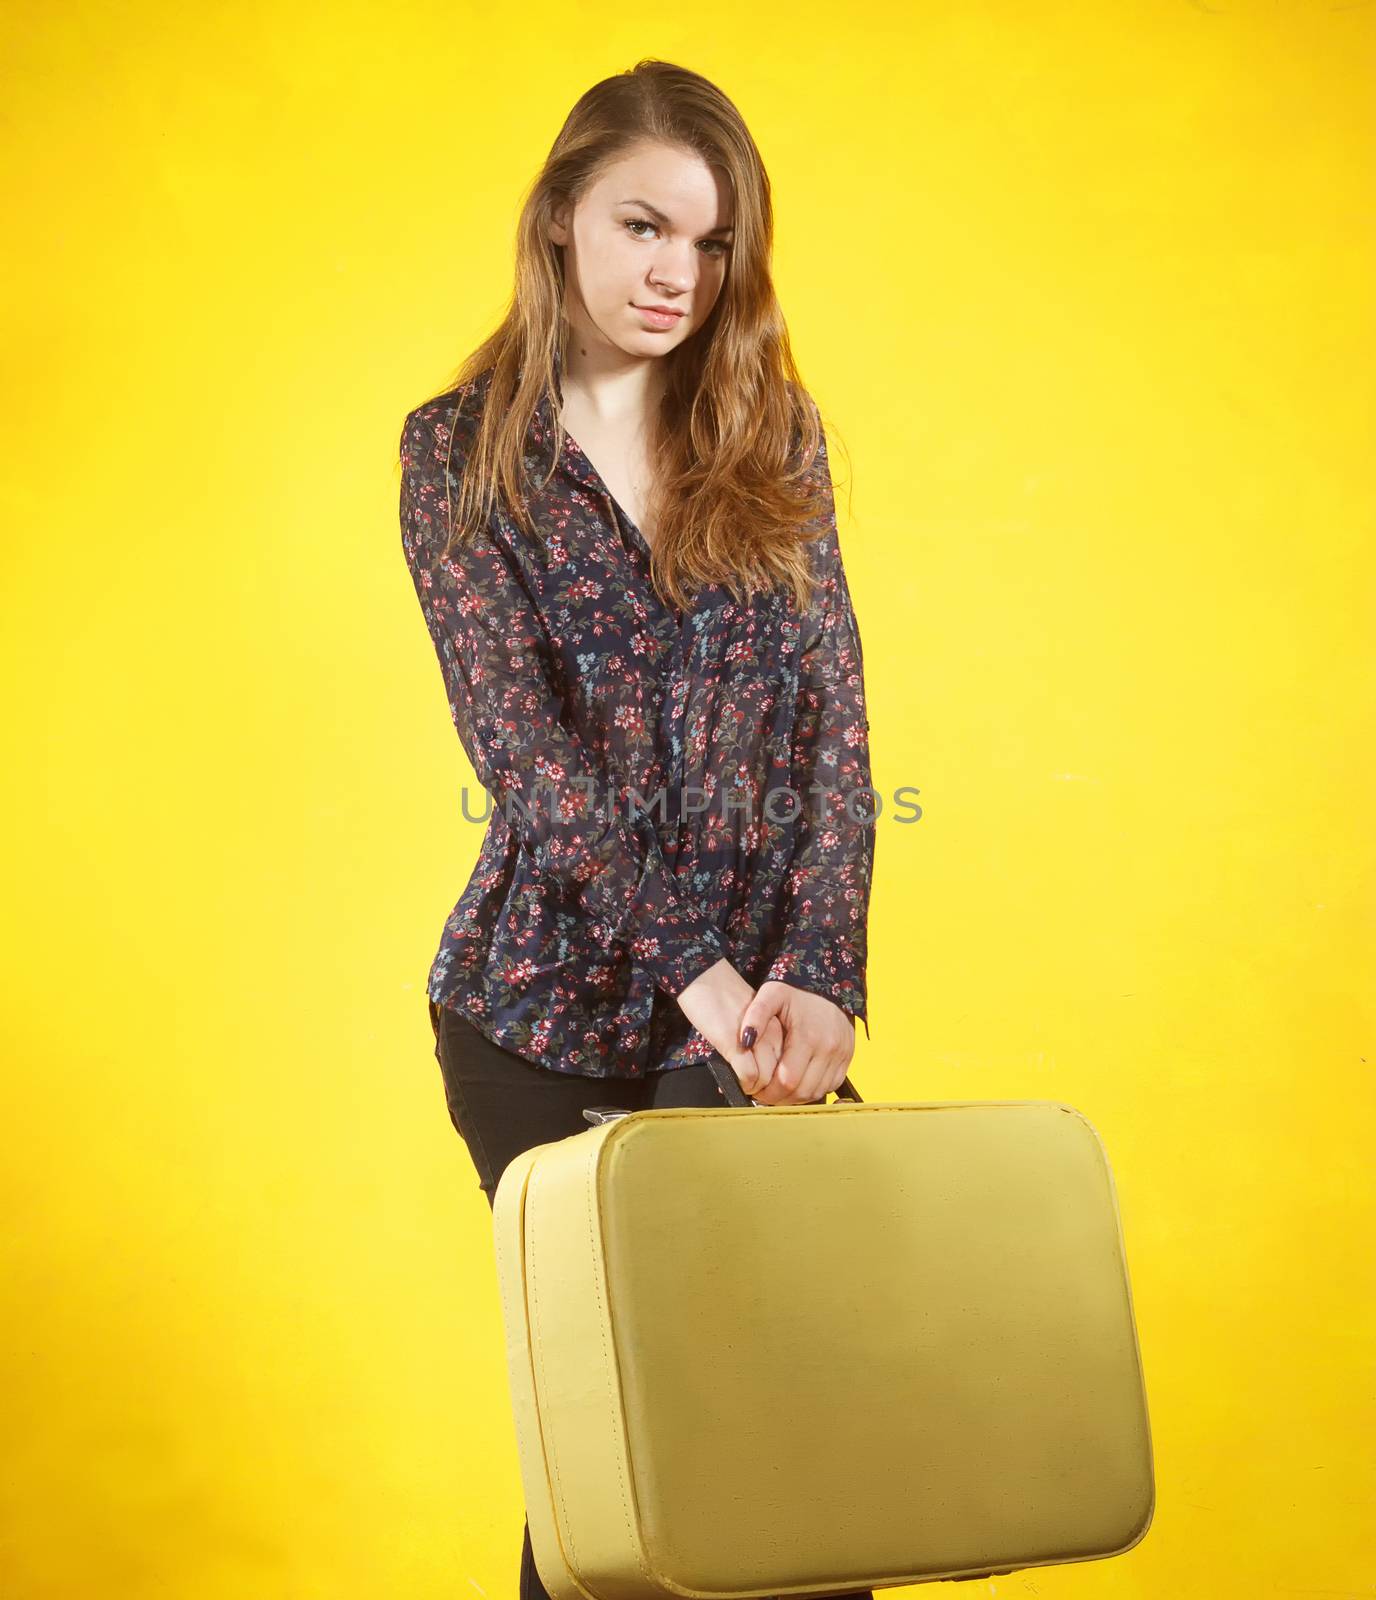 Girl with yellow suitecase on yellow background